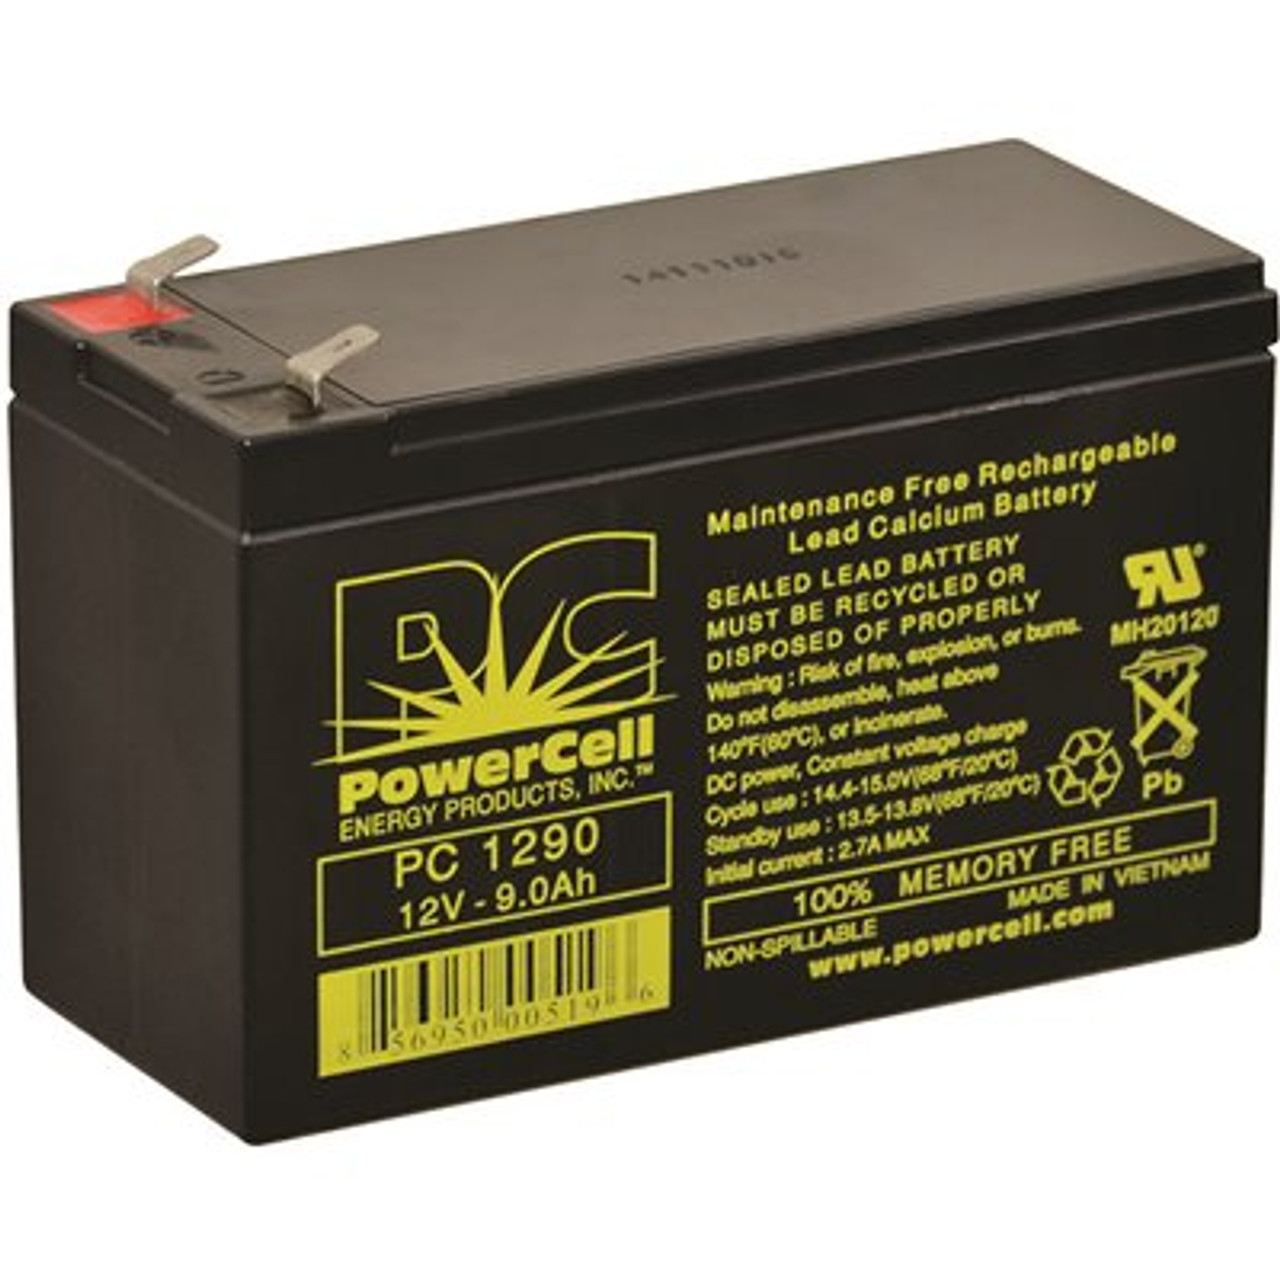 12-Volt 9.0 Ah, F2 Terminal, Sealed Lead-Acid, AGM, Maintenance Free, Rechargeable, Non-spillable, Battery